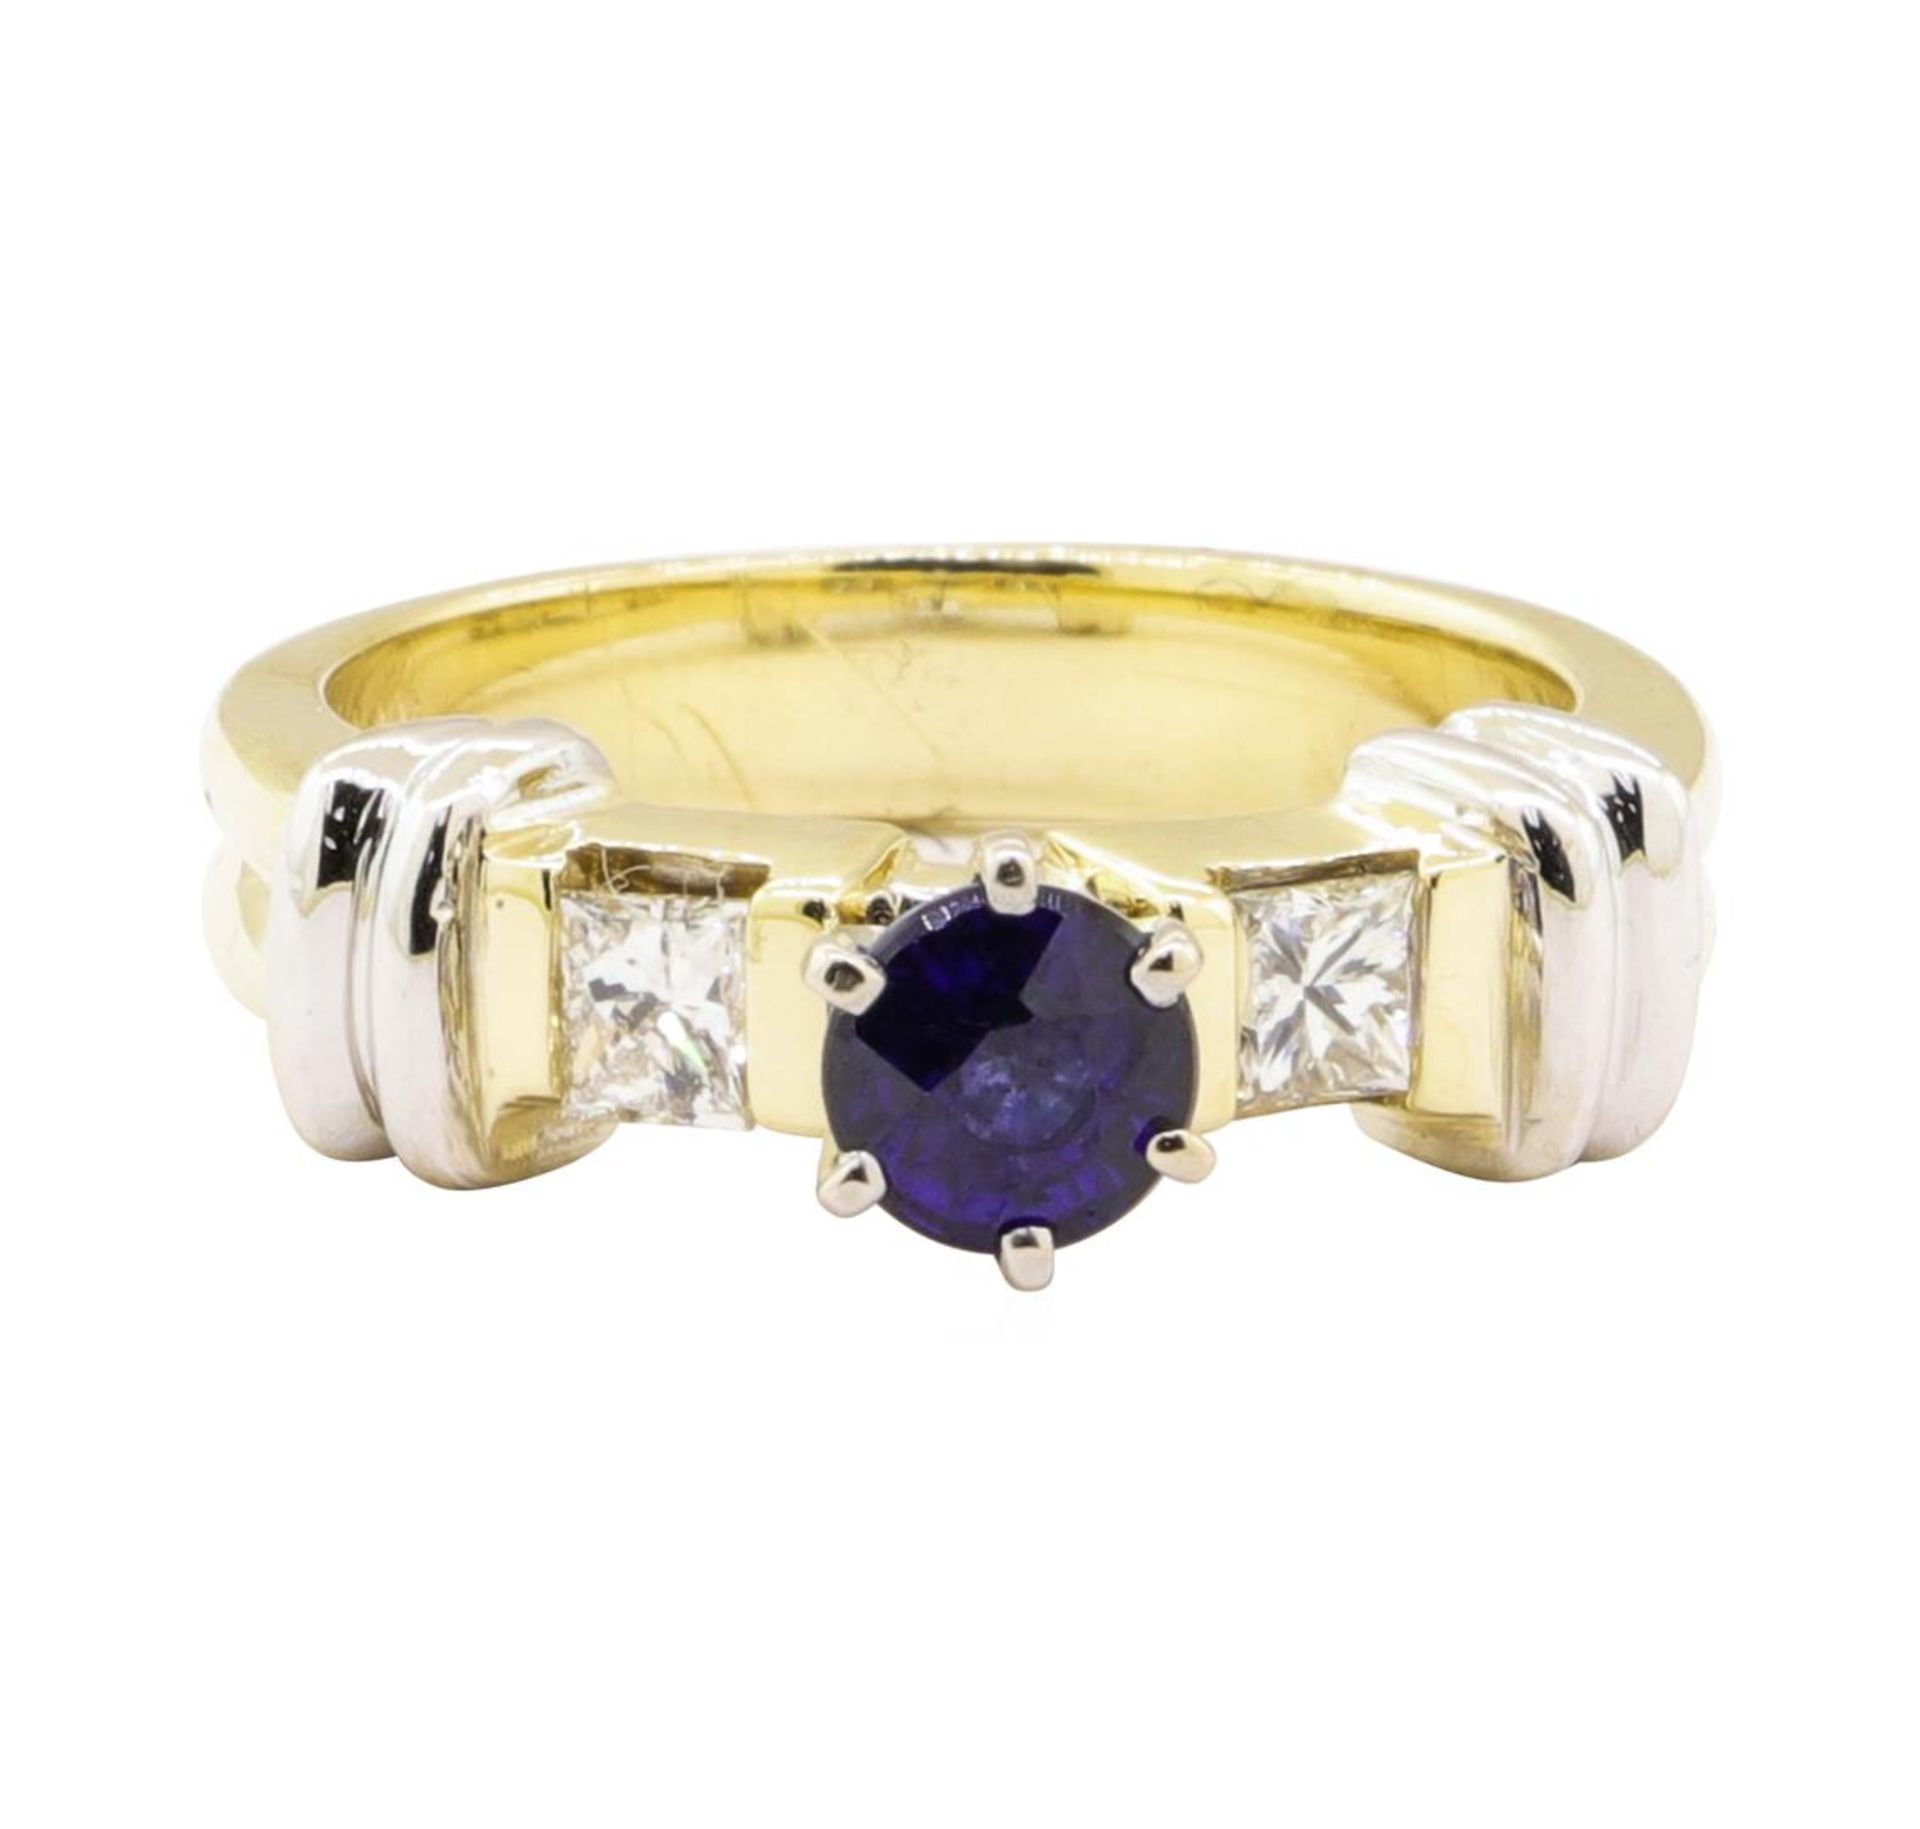 1.16 ctw Blue Sapphire and Diamond Ring - 14KT Yellow and White Gold - Image 2 of 4